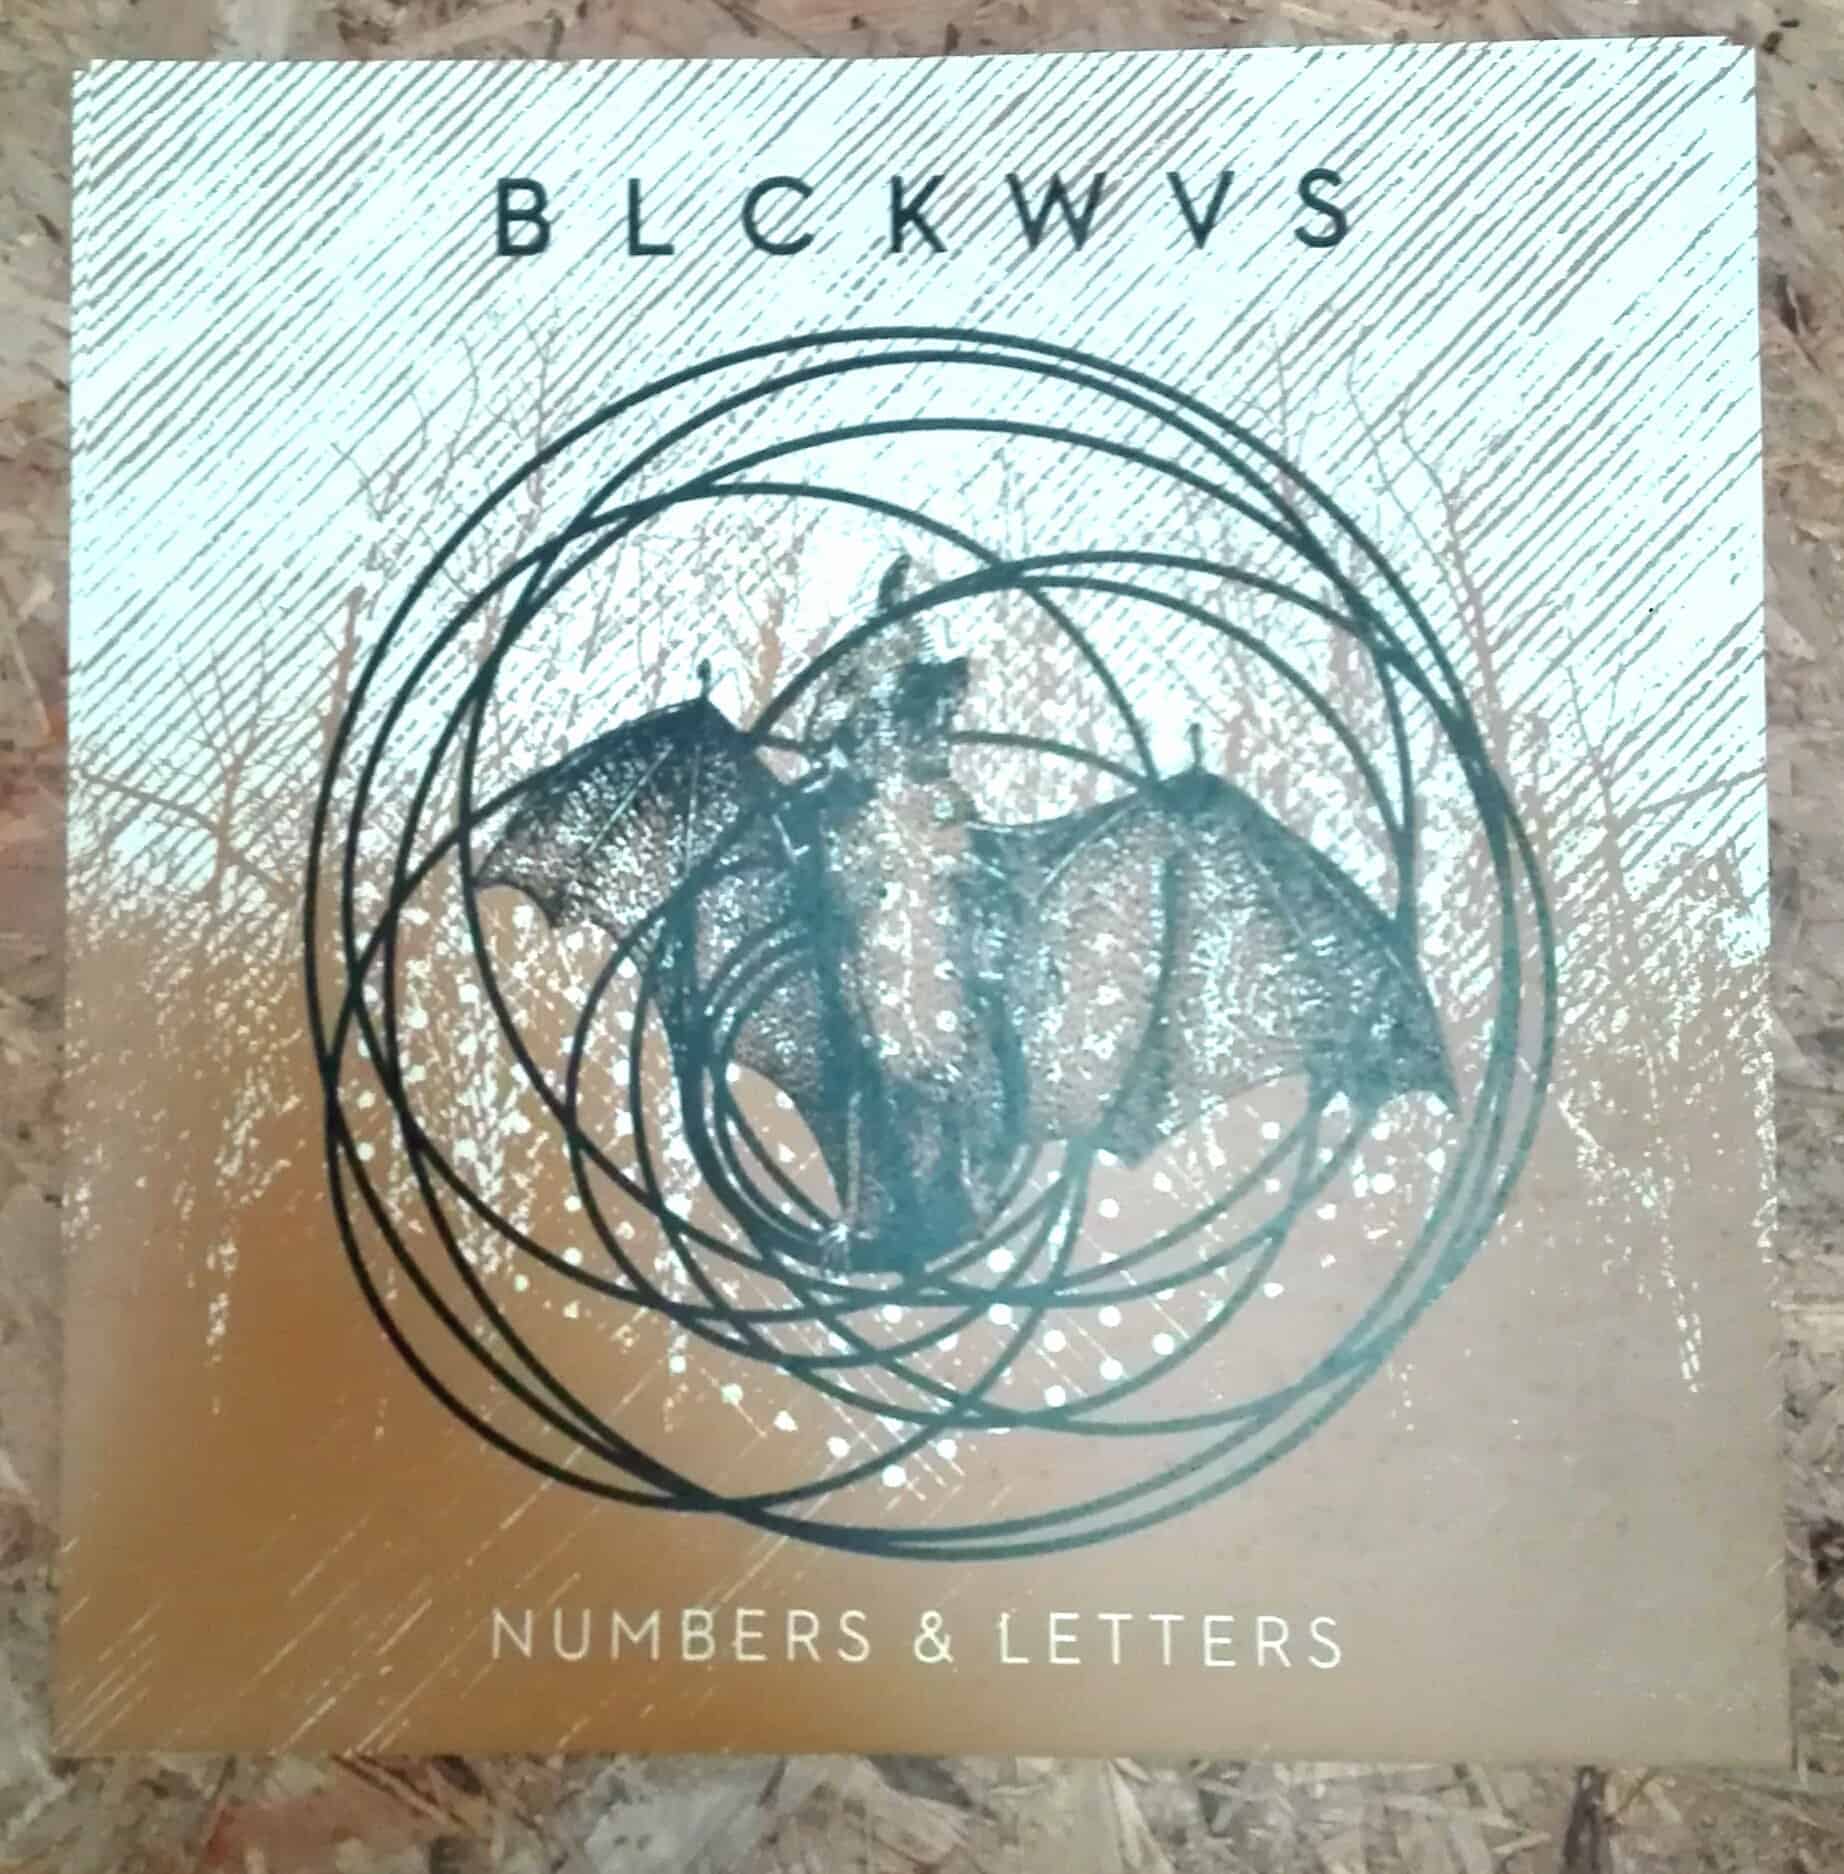 BLCKWVS - Bat Screenprints this design was printed for the long sold out discography BLCKWVS LP Box - i found some spare Prints in the depth of the warehouse!